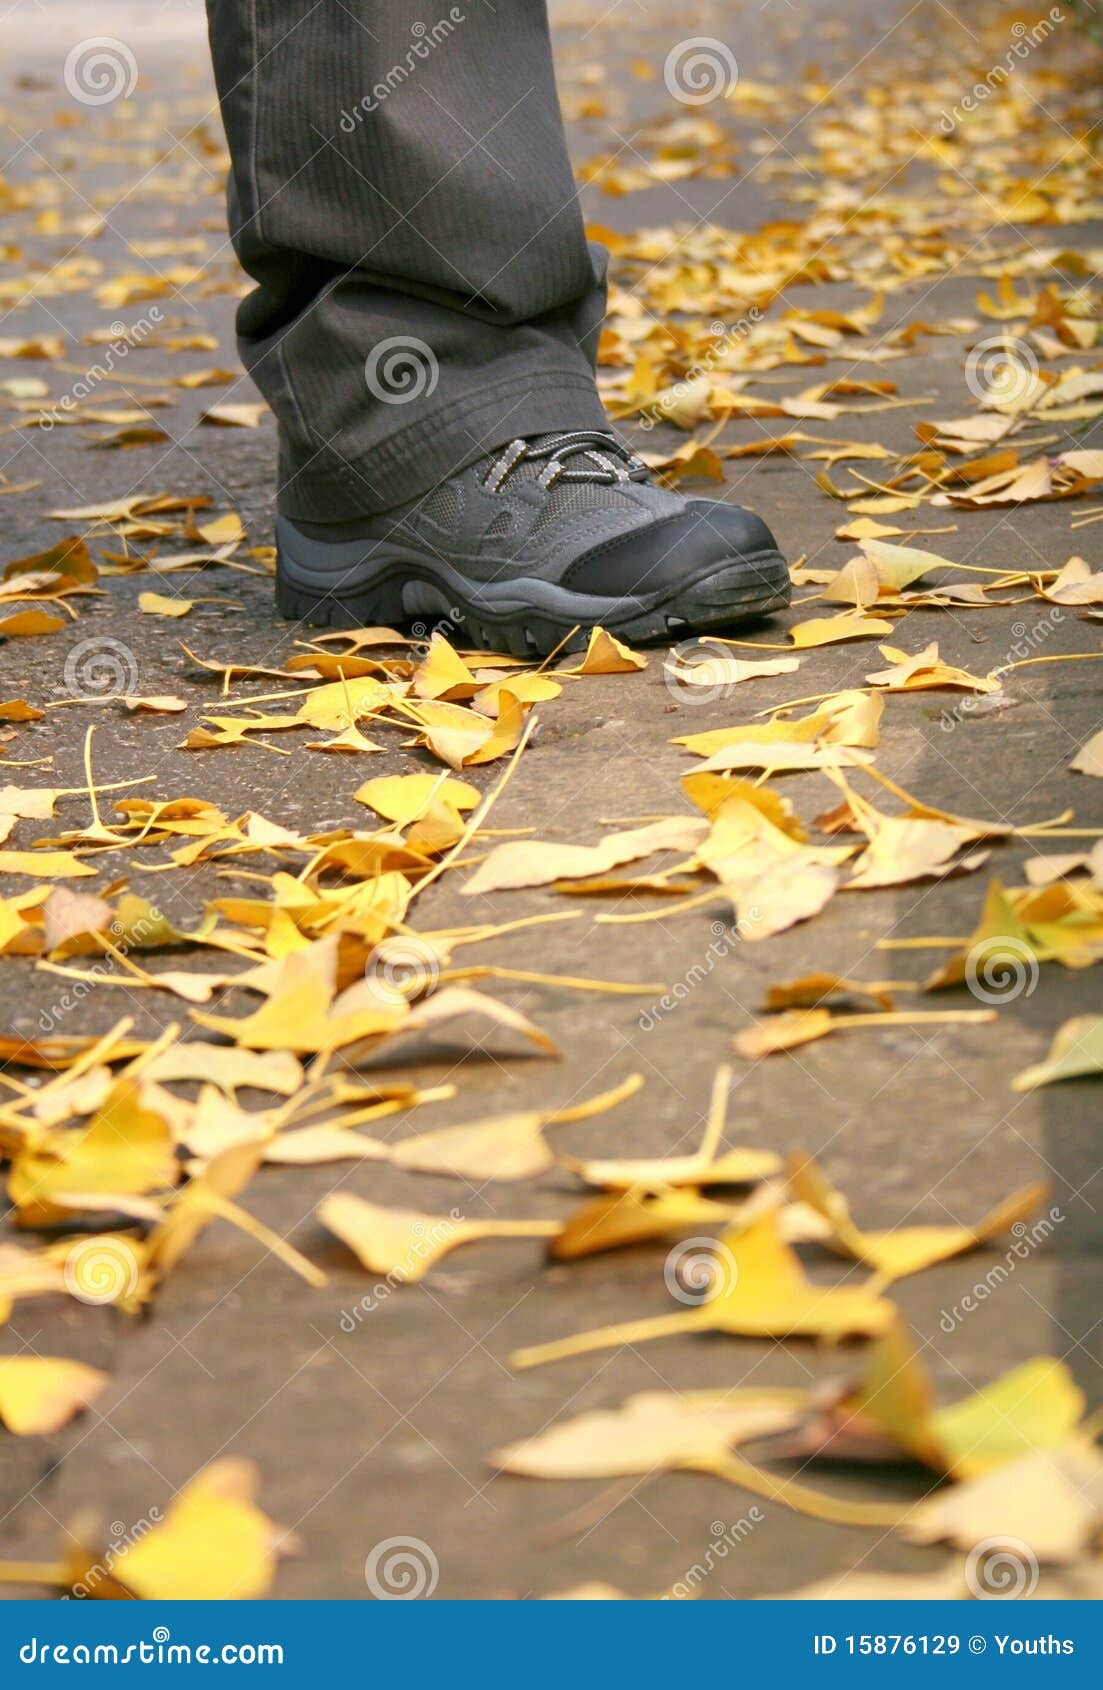 Autumn has come, yellow ginkgo leaves fall to the ground. Autumn is 